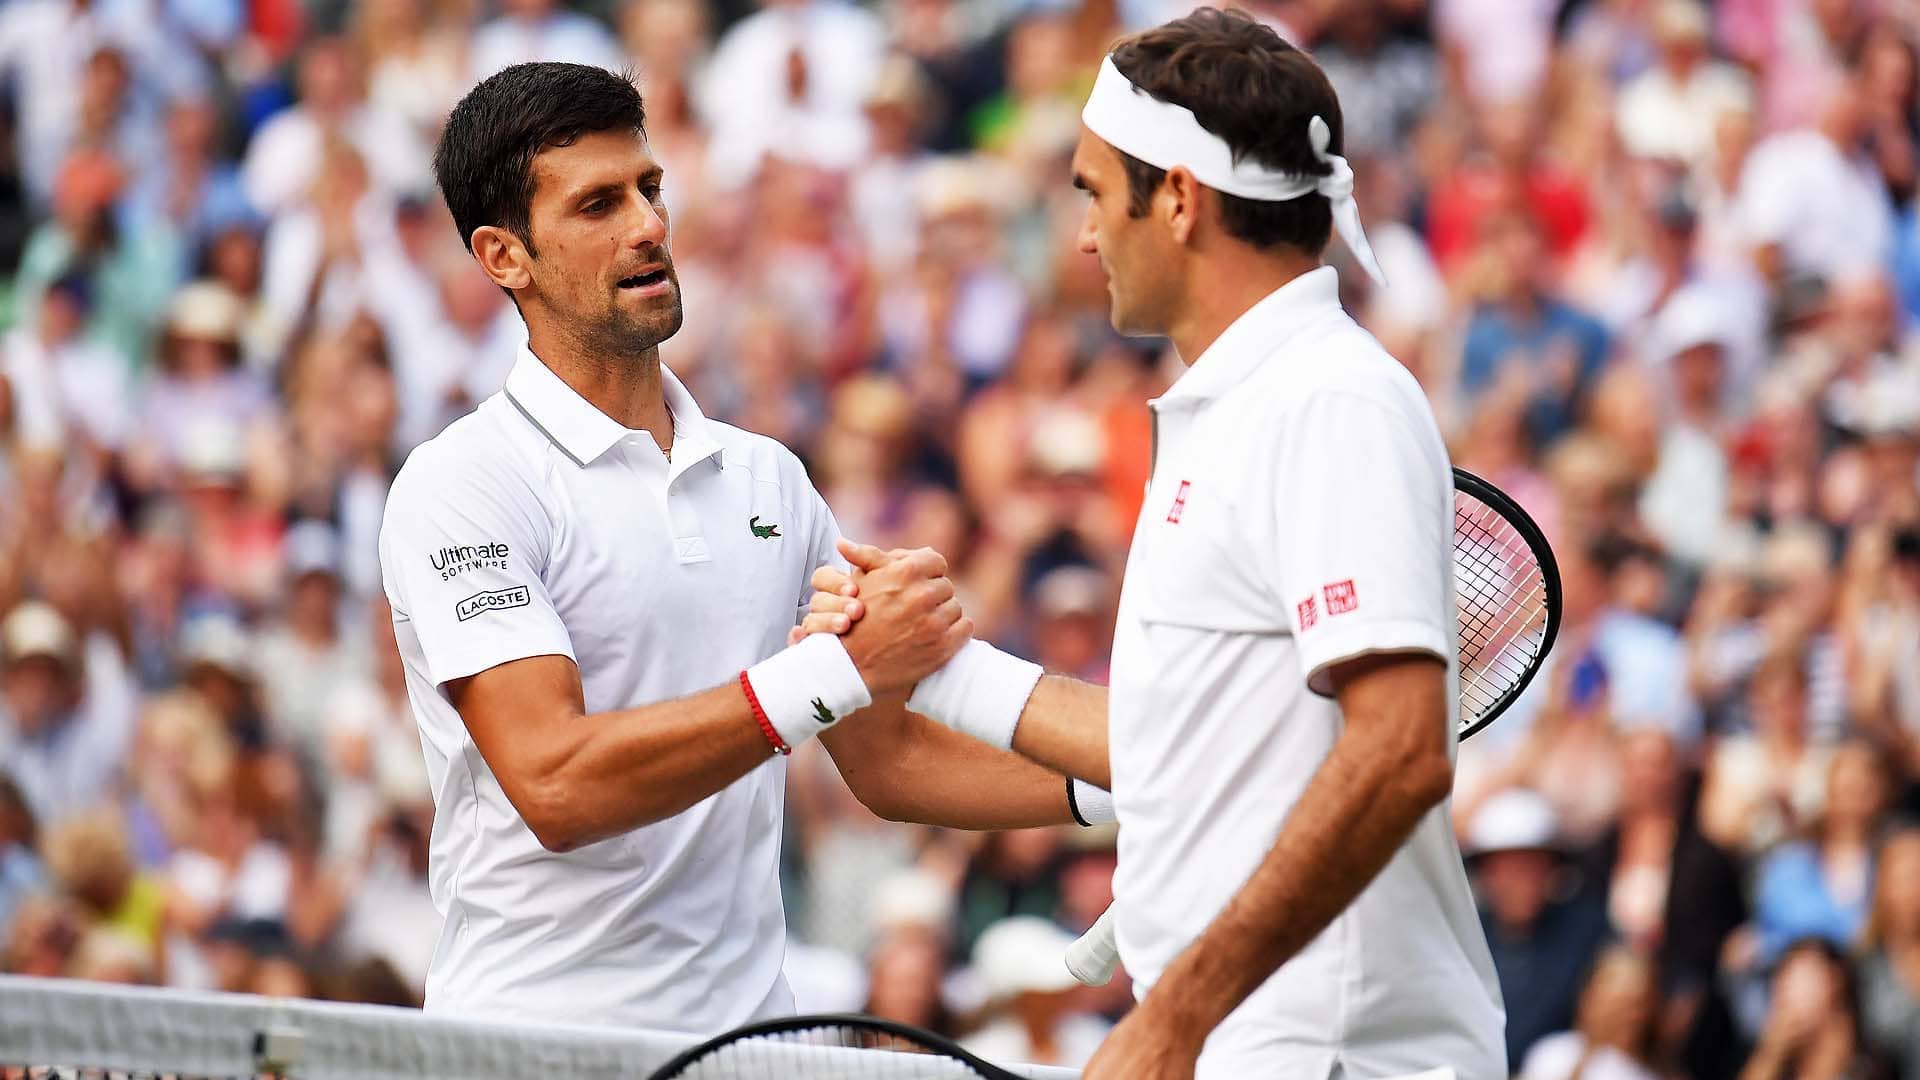 Two-time defending champion Novak Djokovic could meet 2019 finalist Roger Federer in the quarter-finals at this year's Wimbledon.